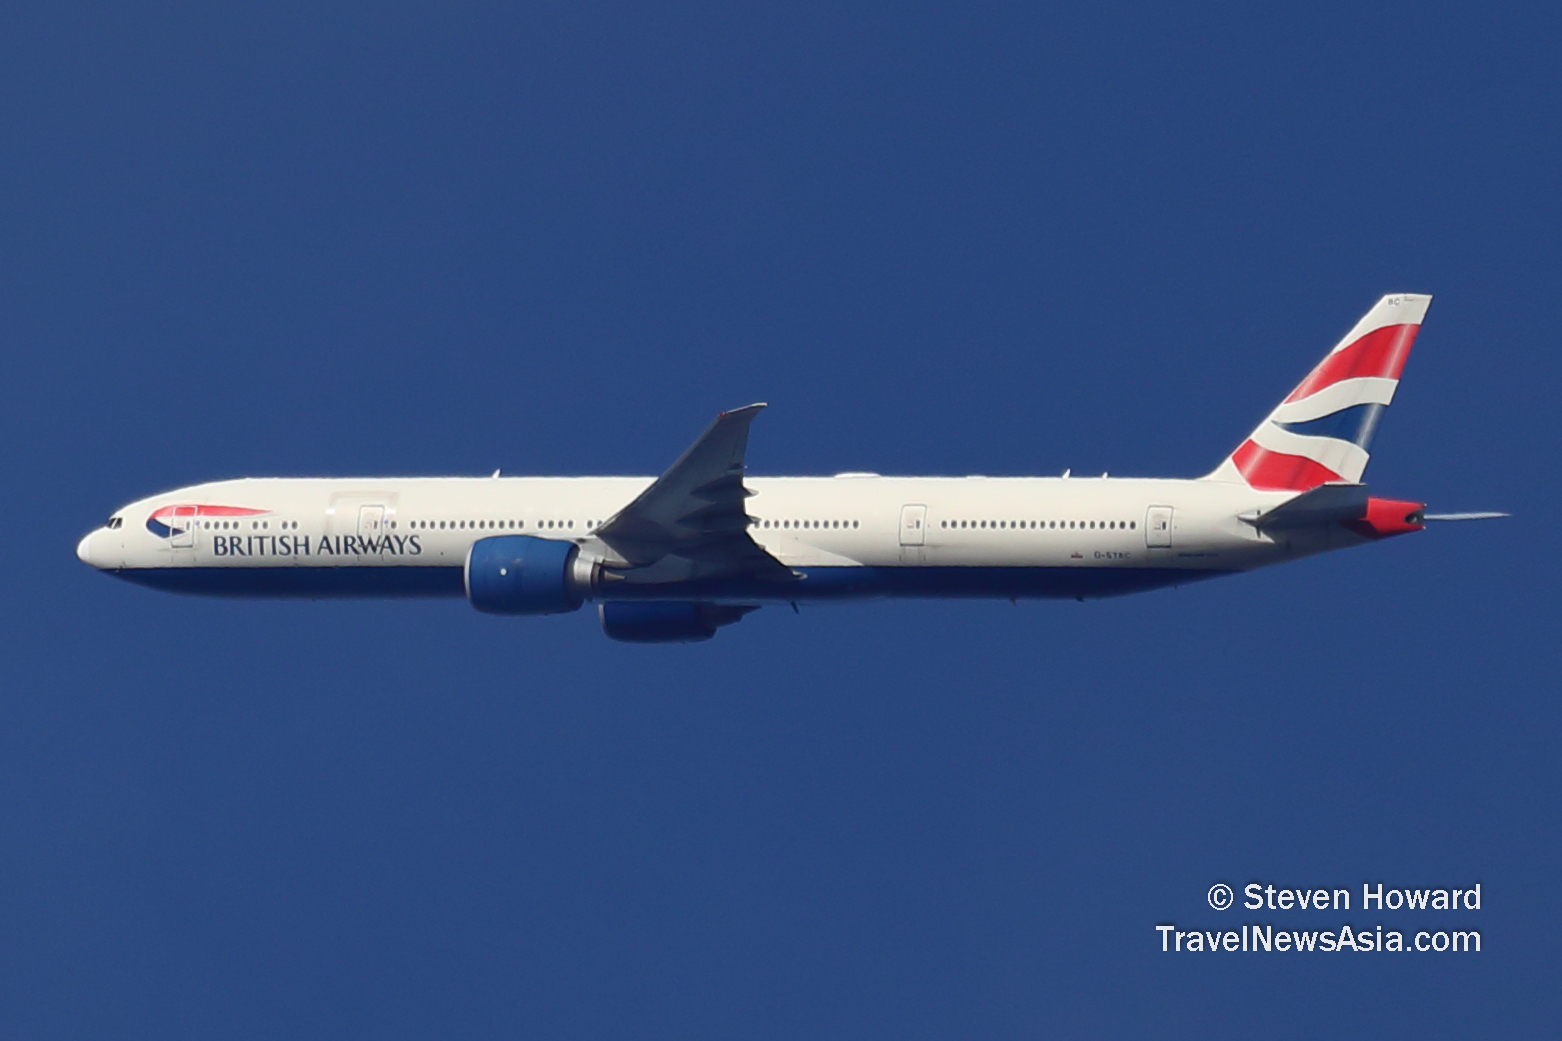 British Airways Boeing 777 reg: G-STBC. Picture by Steven Howard of TravelNewsAsia.com Click to enlarge.